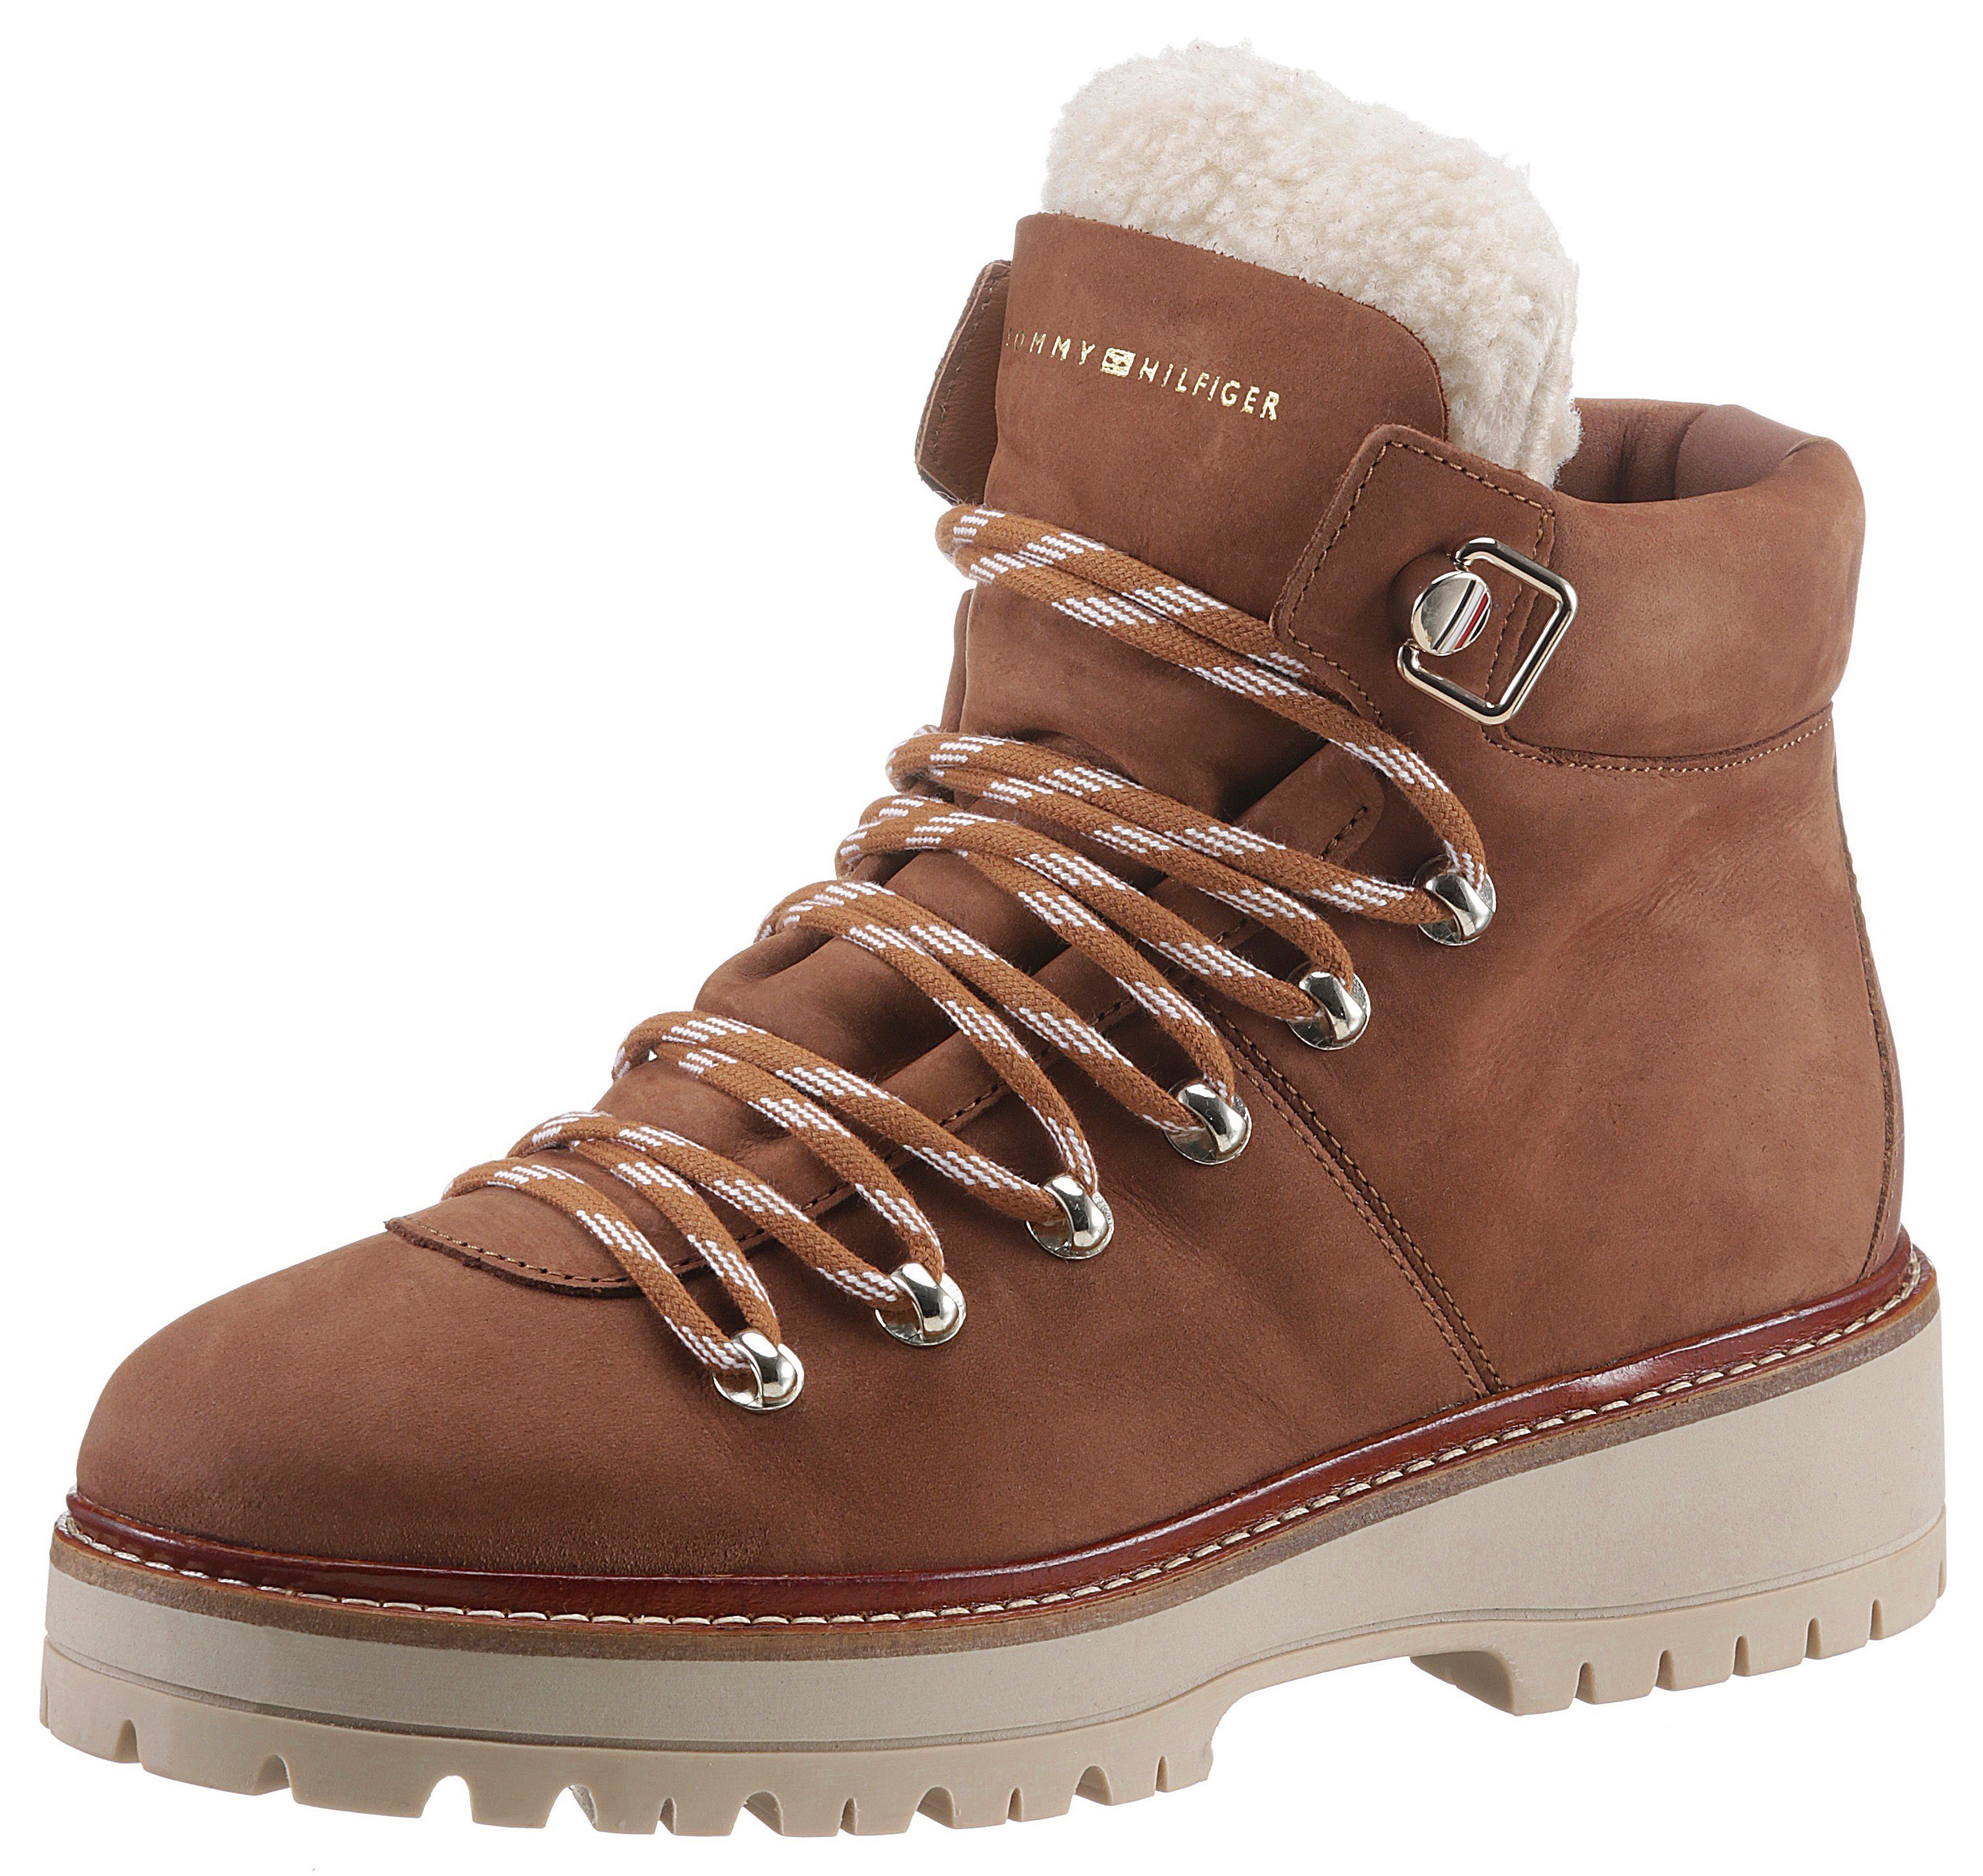 FLAT BOOT Tommy Hilfiger LEATHER OUTDOOR im Bergsteiger-Look Winterboots